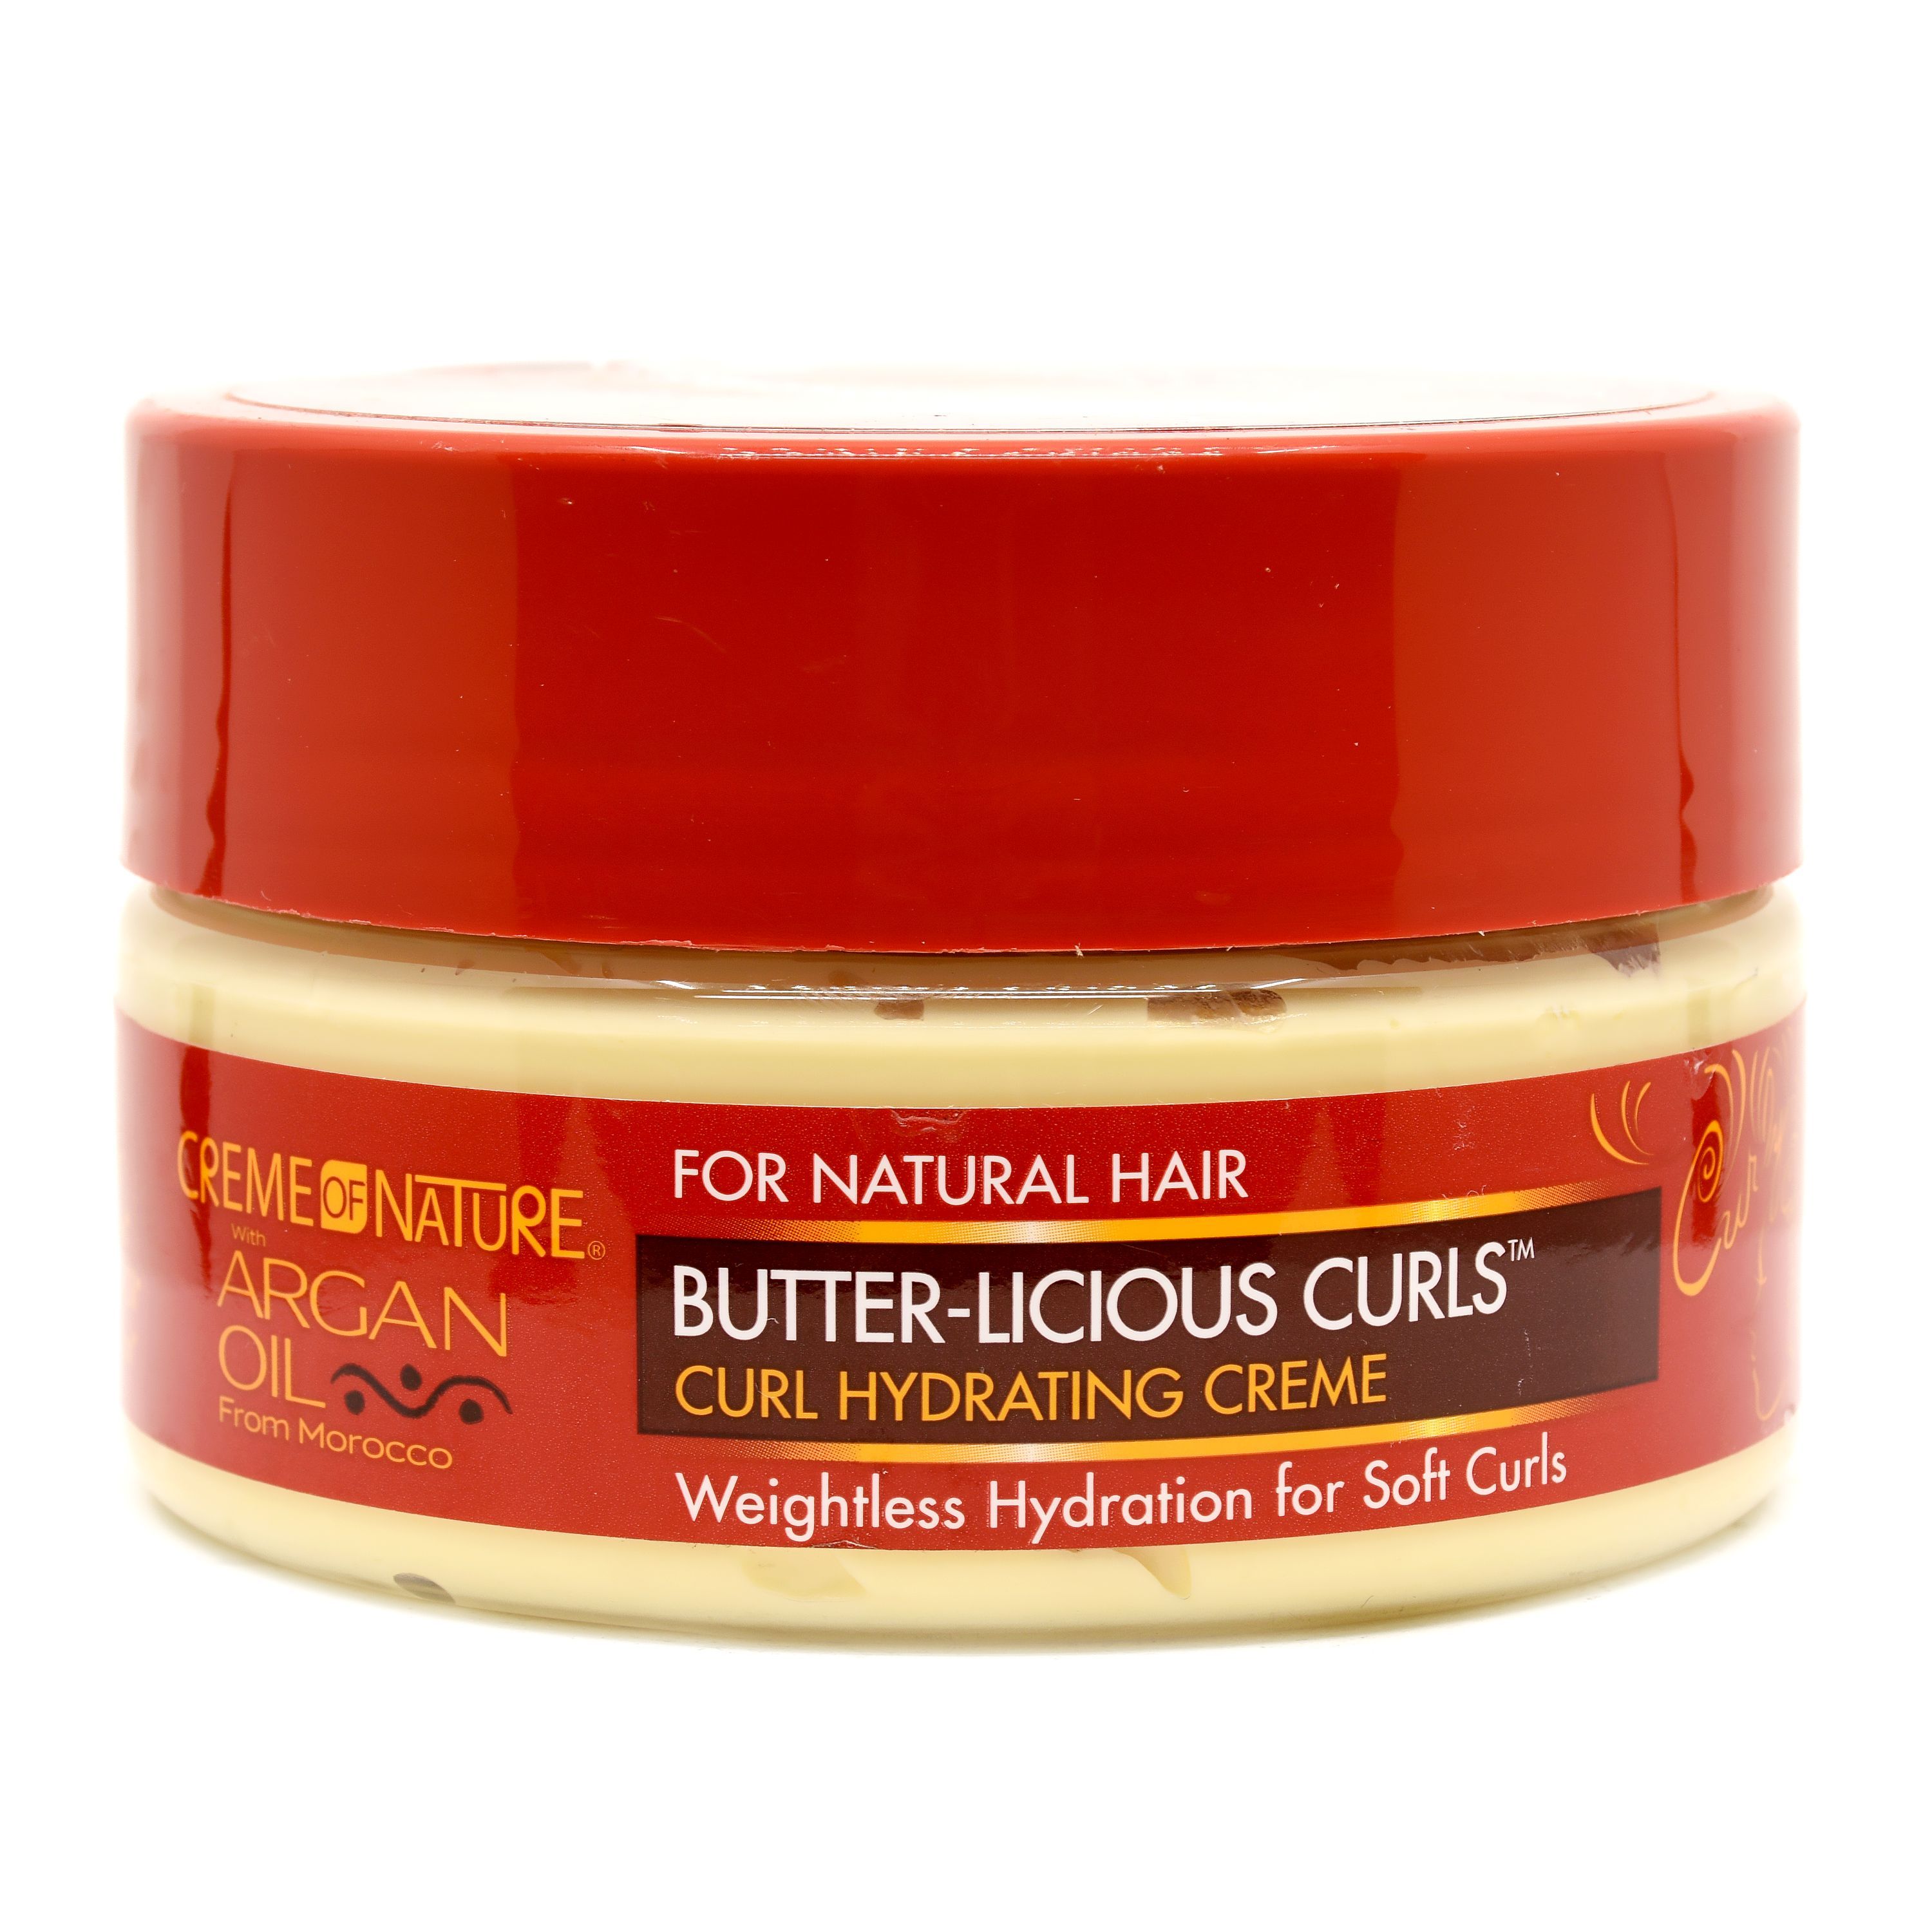 Creme Of Nature Butter-licious Curls Hydrating Creme - 7.5oz